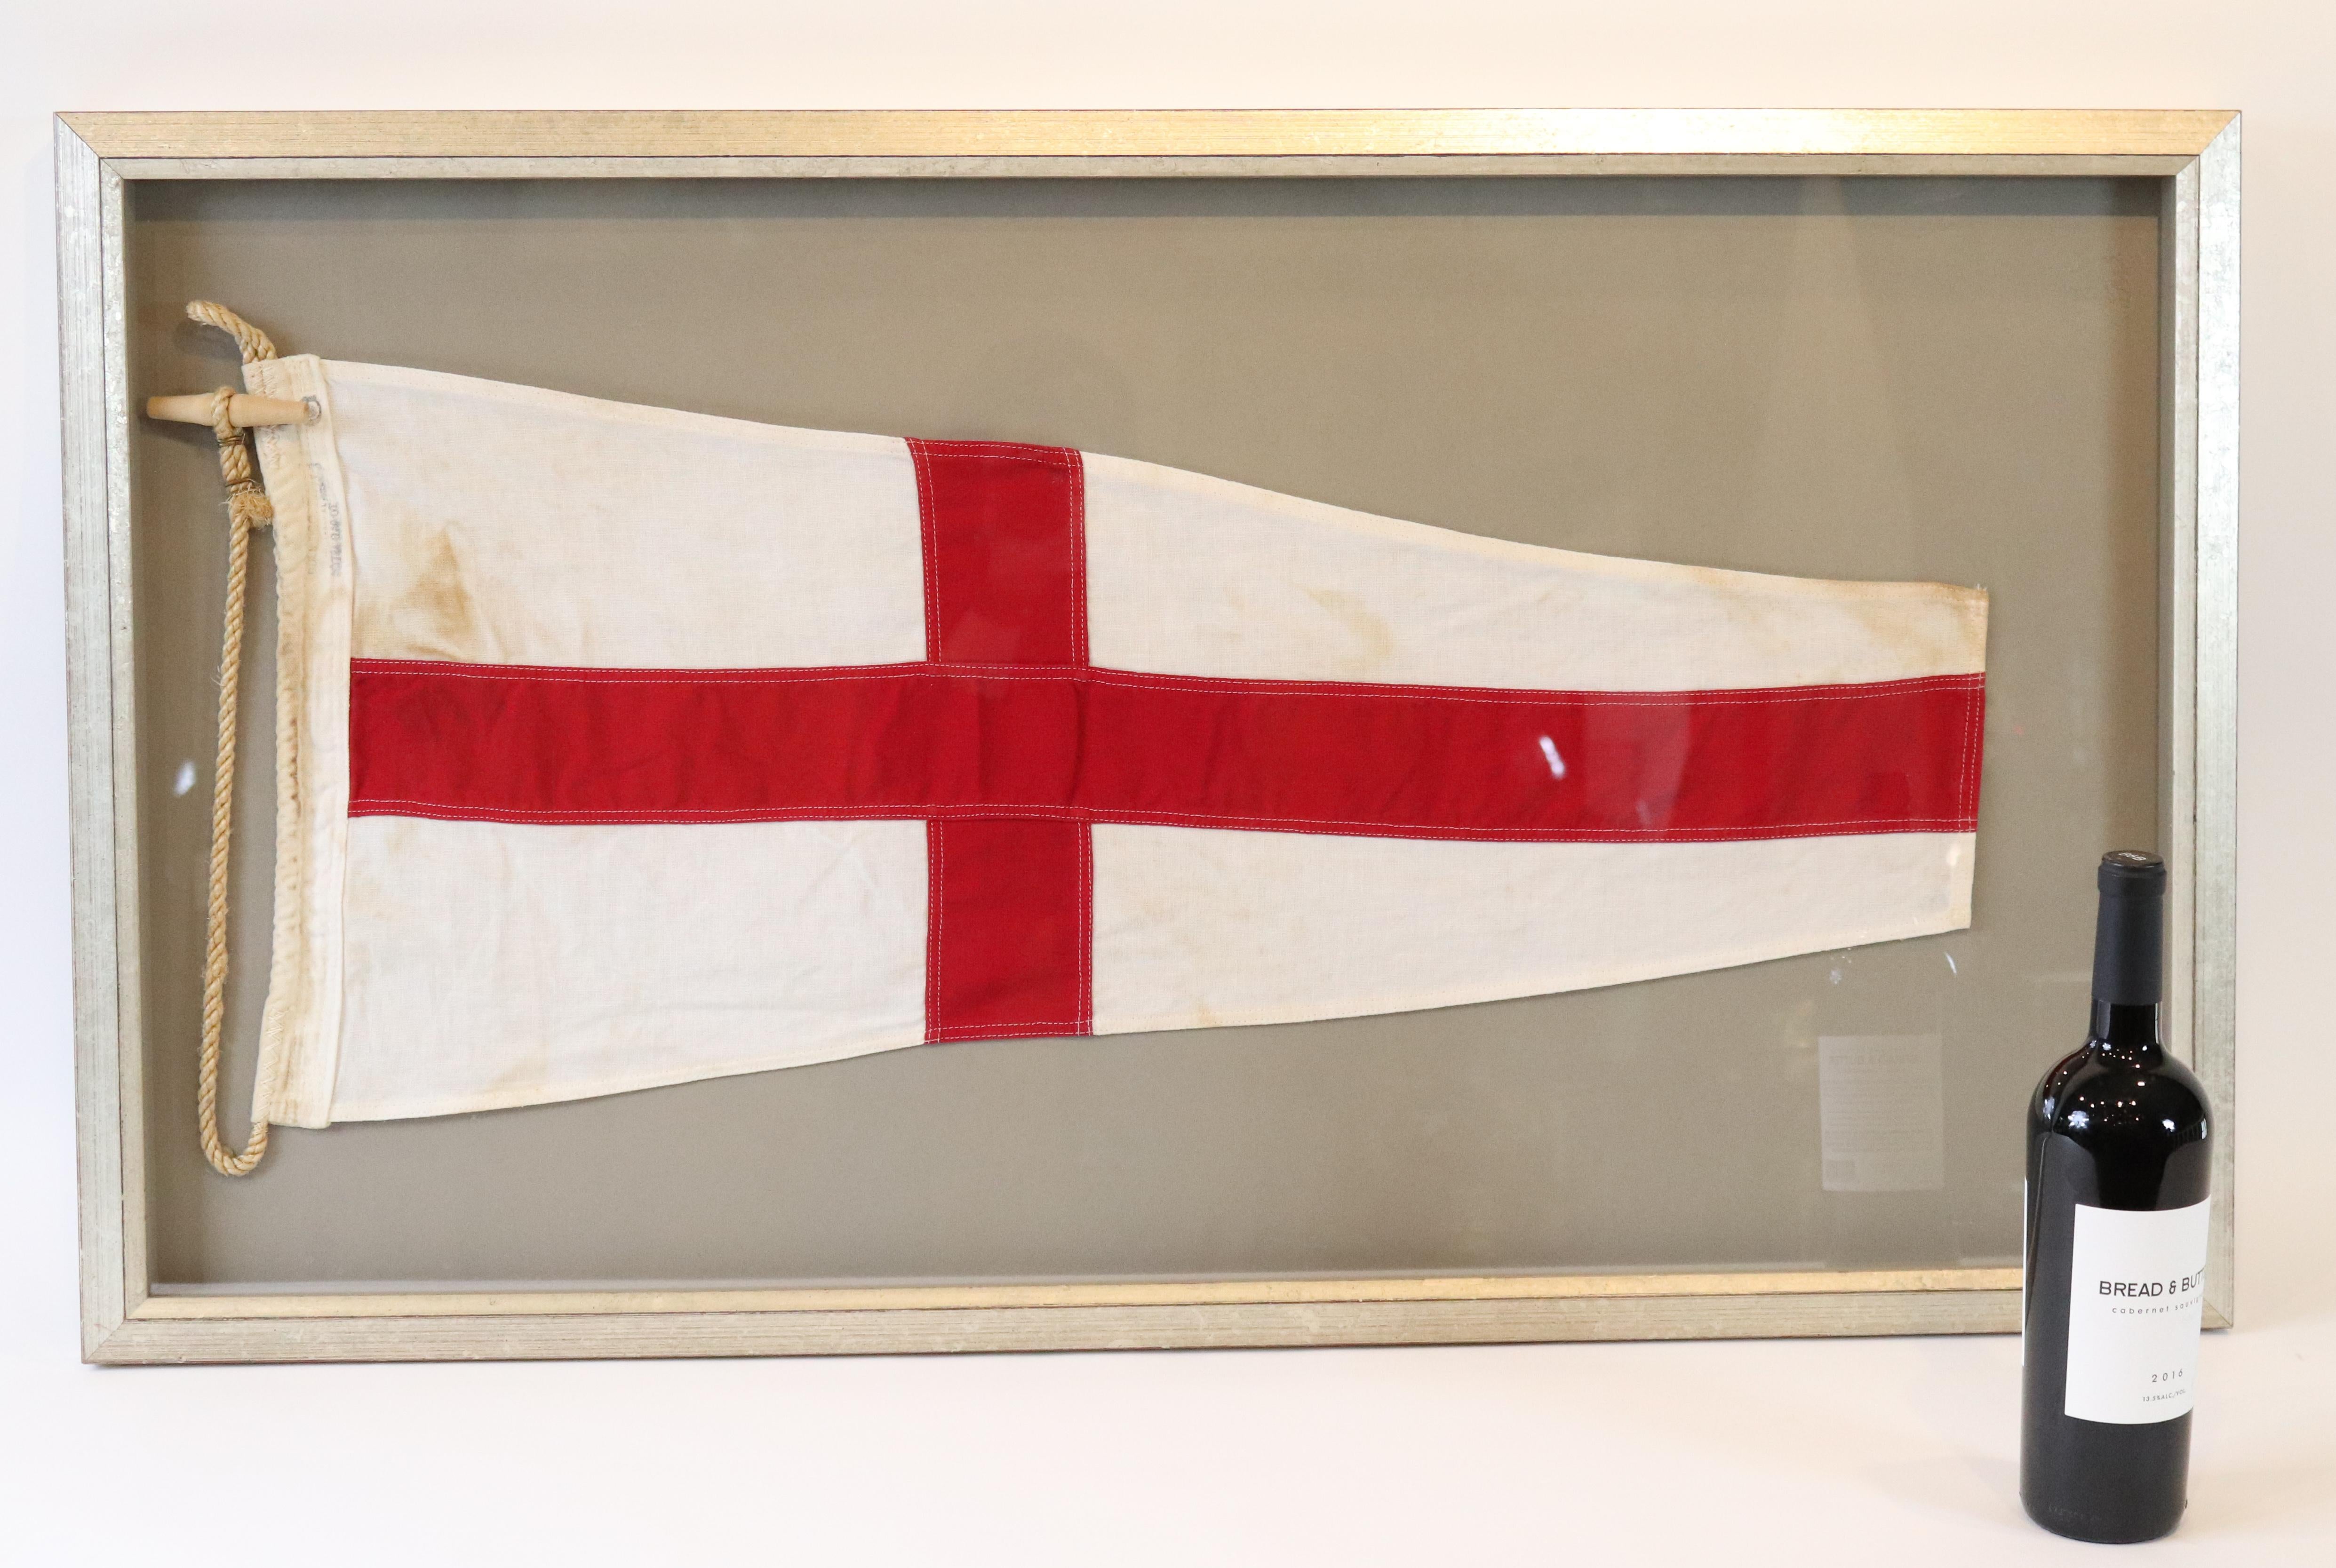 Cotton International maritime signal flag representing the number 8. Displayed in shadowbox frame. Measures: 24